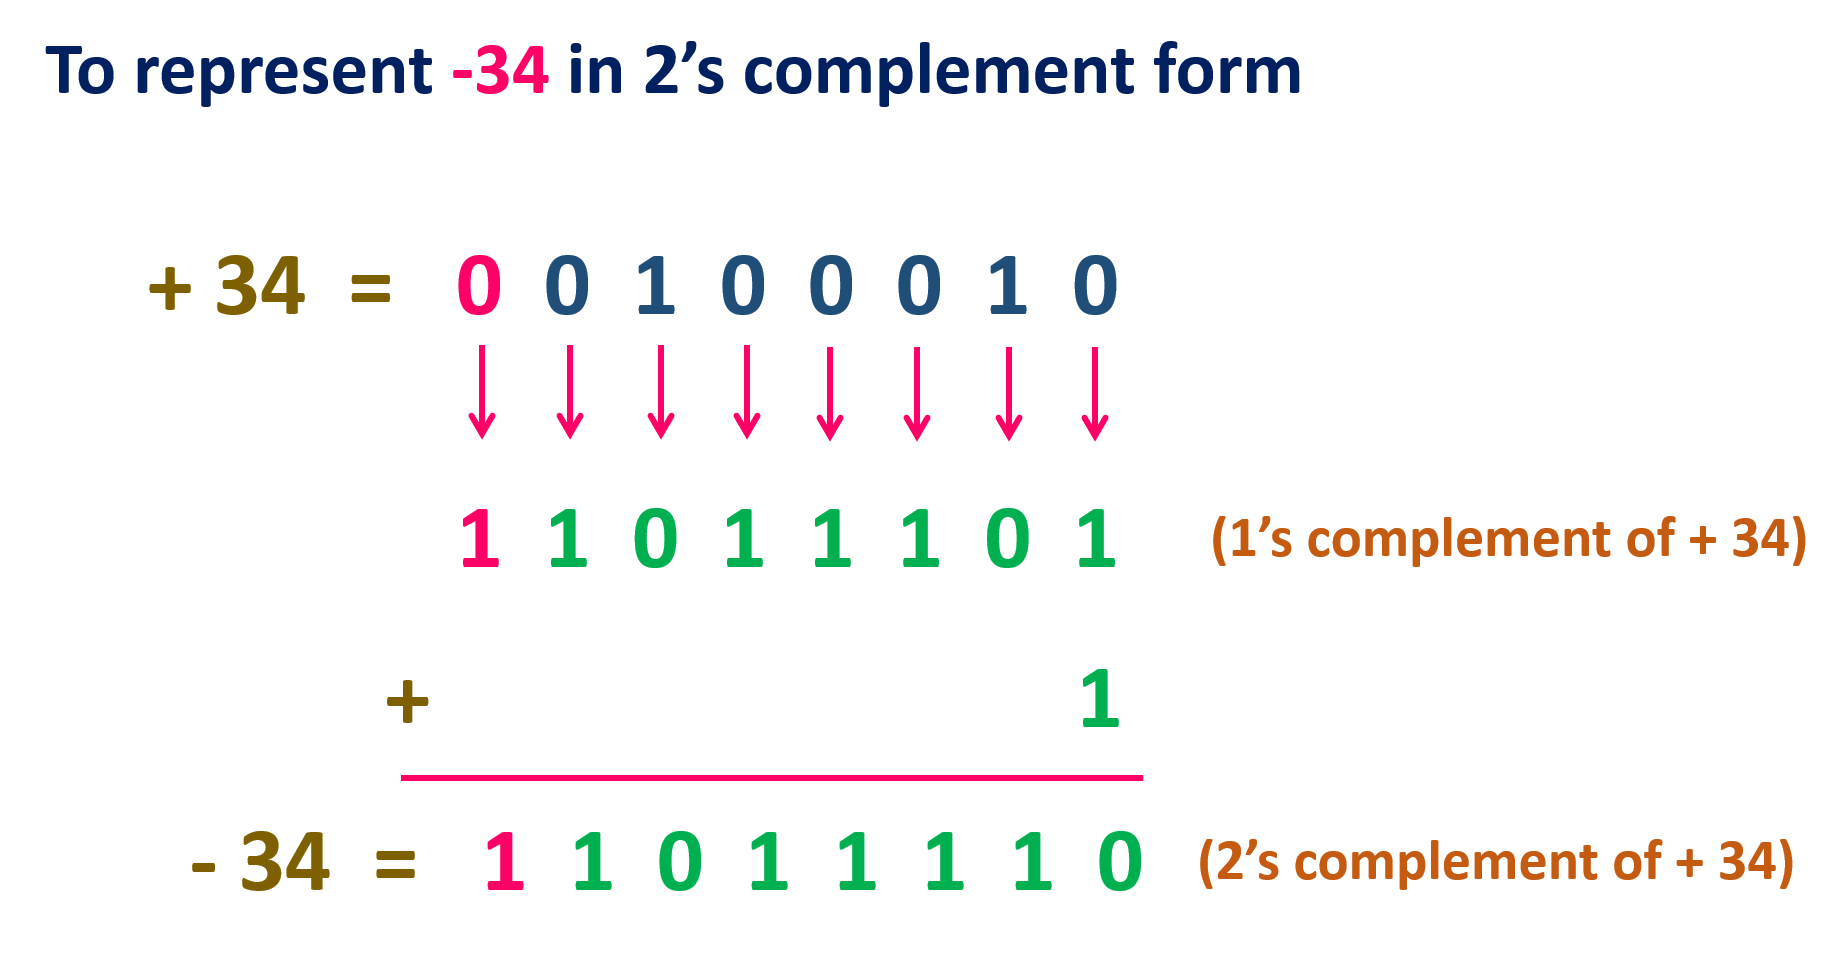 2'S Complement / Two's complement / Calculator is used to calculate the